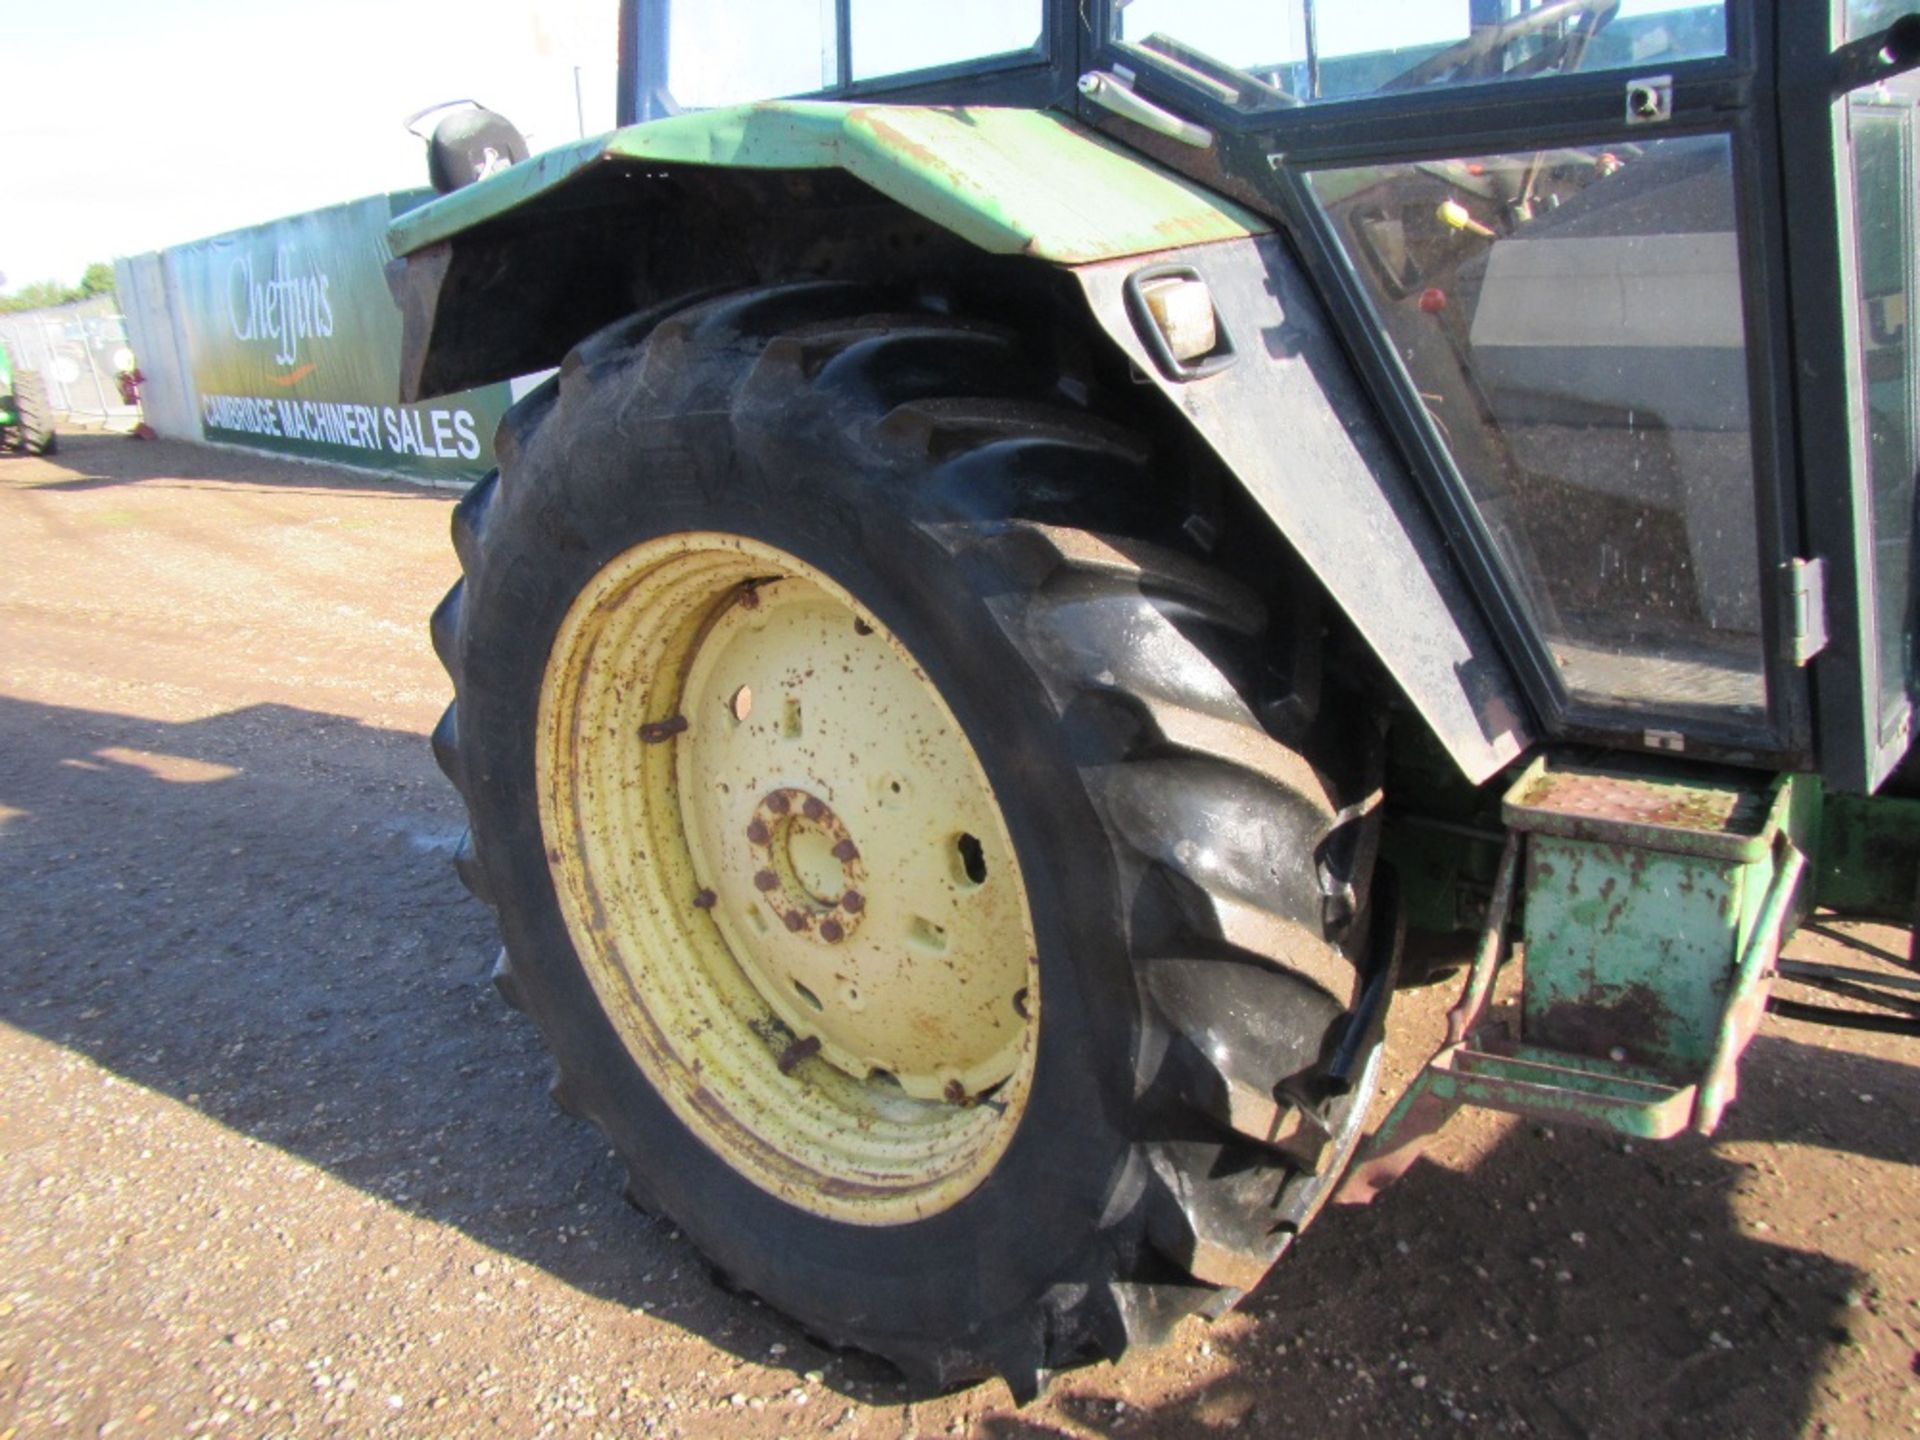 John Deere 3040 2wd Tractor with OPU Cab Reg. No. TFM 461V Ser No 364600 UNRESERVED LOT - Image 5 of 16